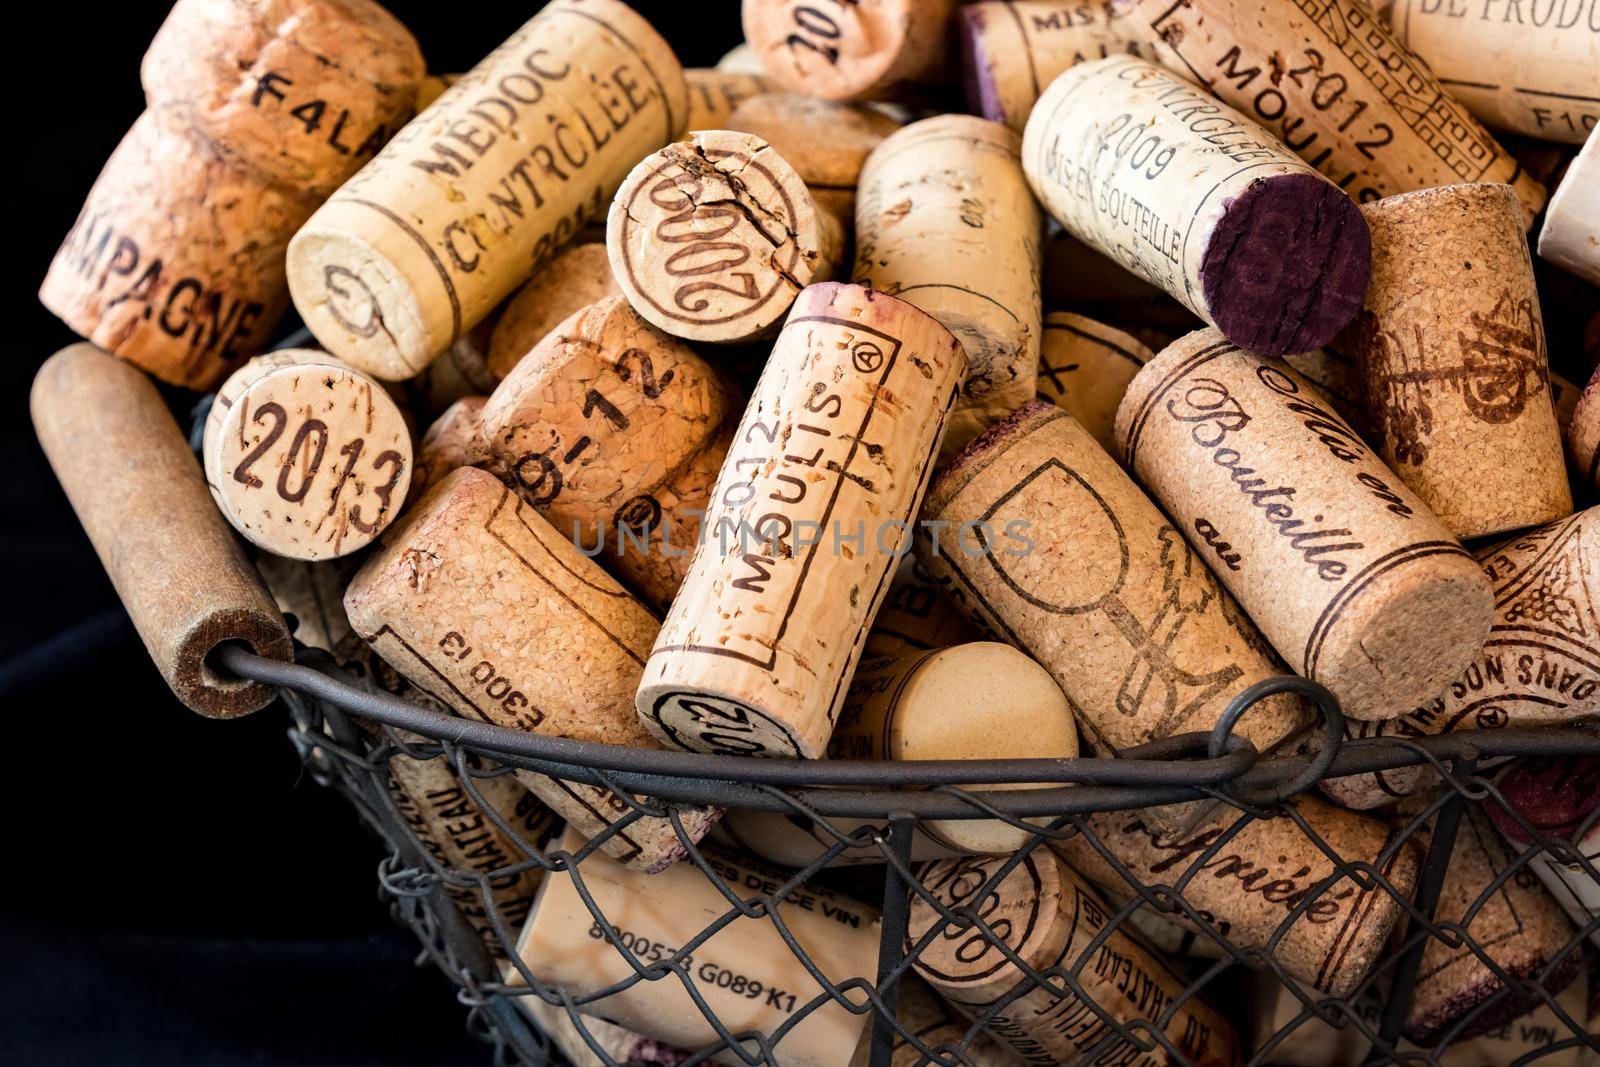 old cork stoppers of French wines in a wire basket by jp_chretien